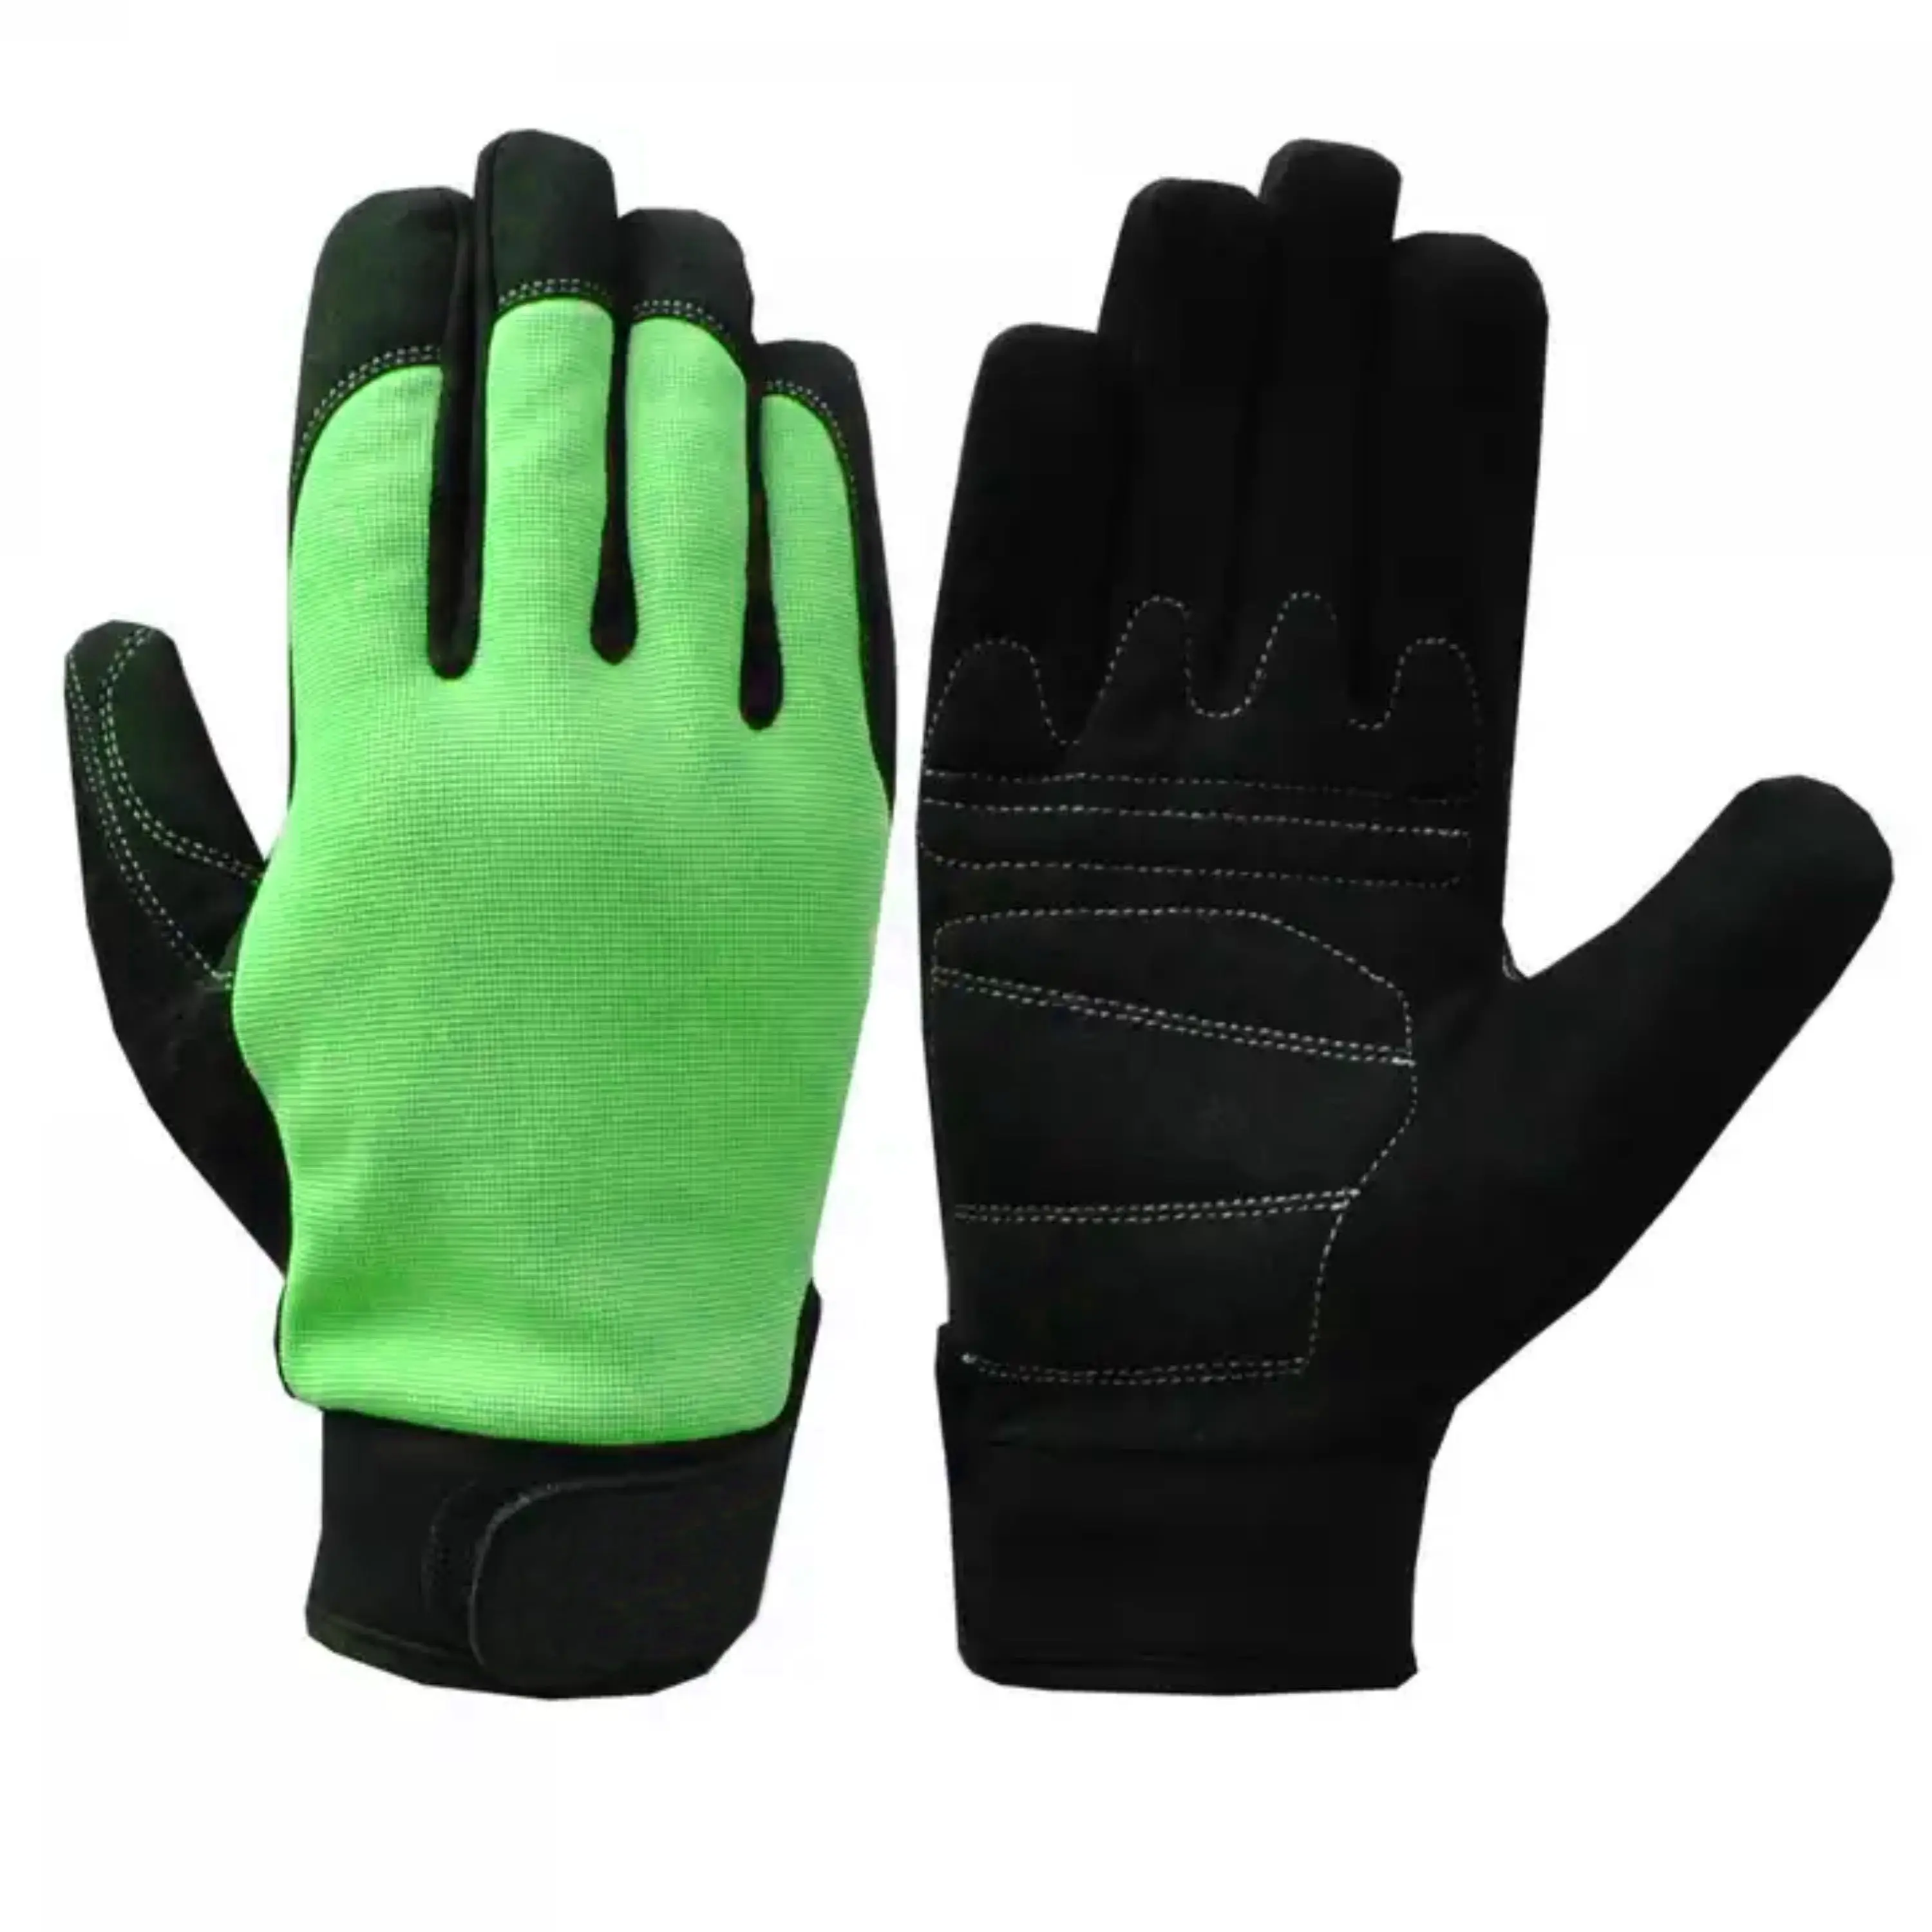 Synthetic Leather Amara Work Gloves Professional Double Layer Palm Windproof Safety Protective Heat Resistant Mechanic Gloves